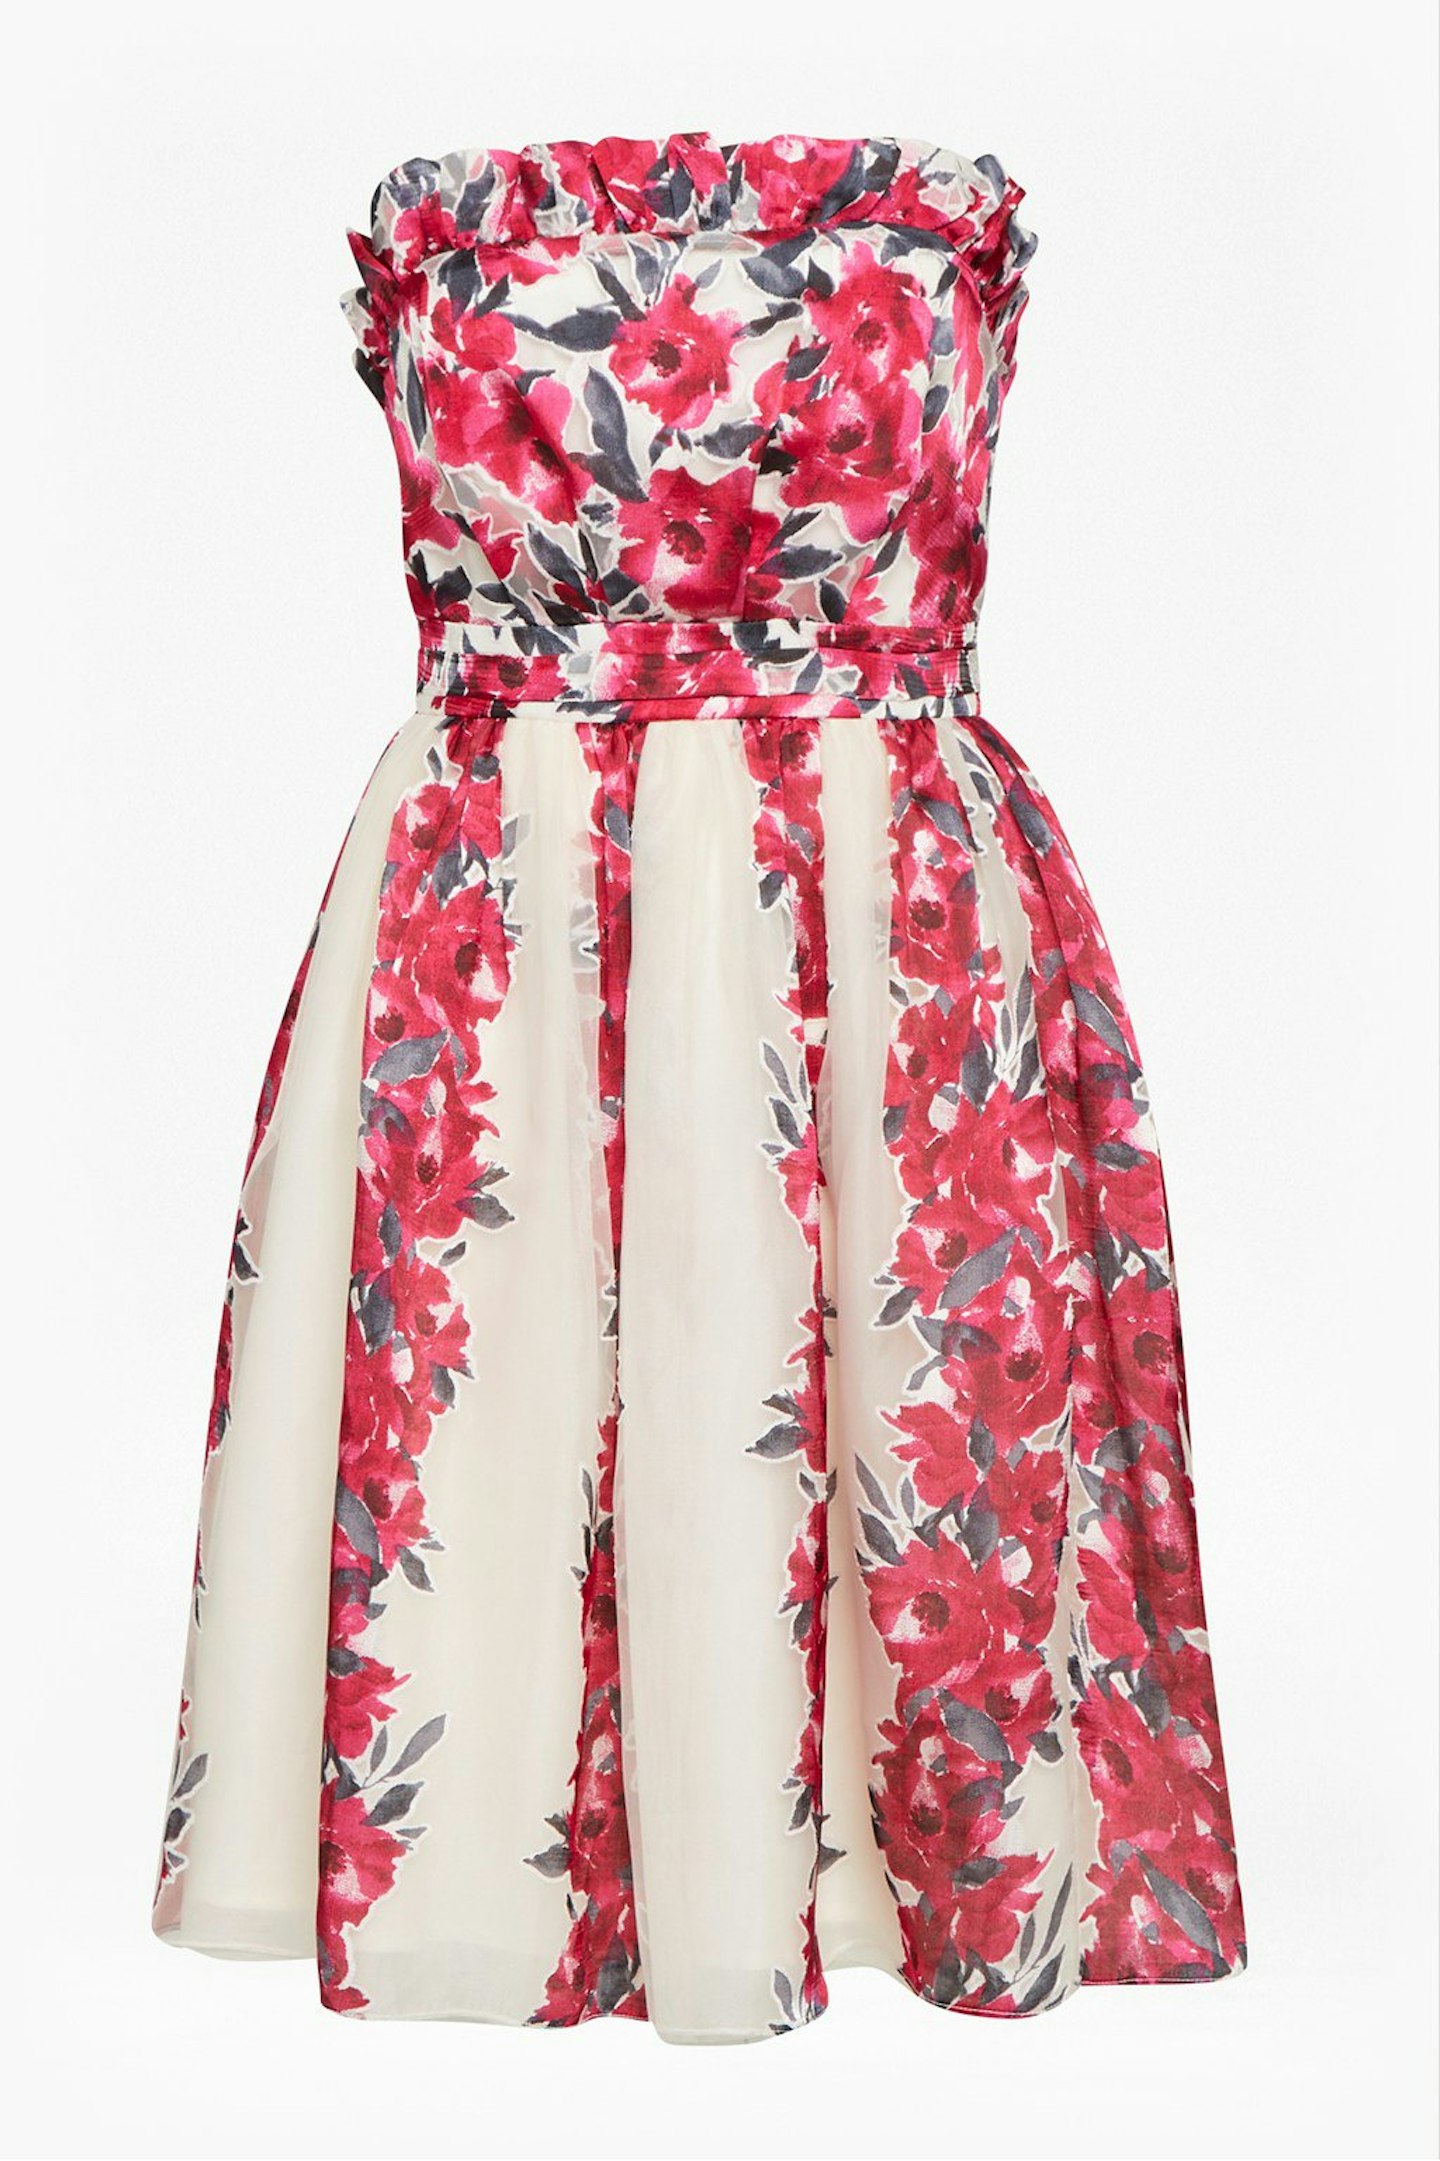 French Connection, Edith Strapless Dress, £132